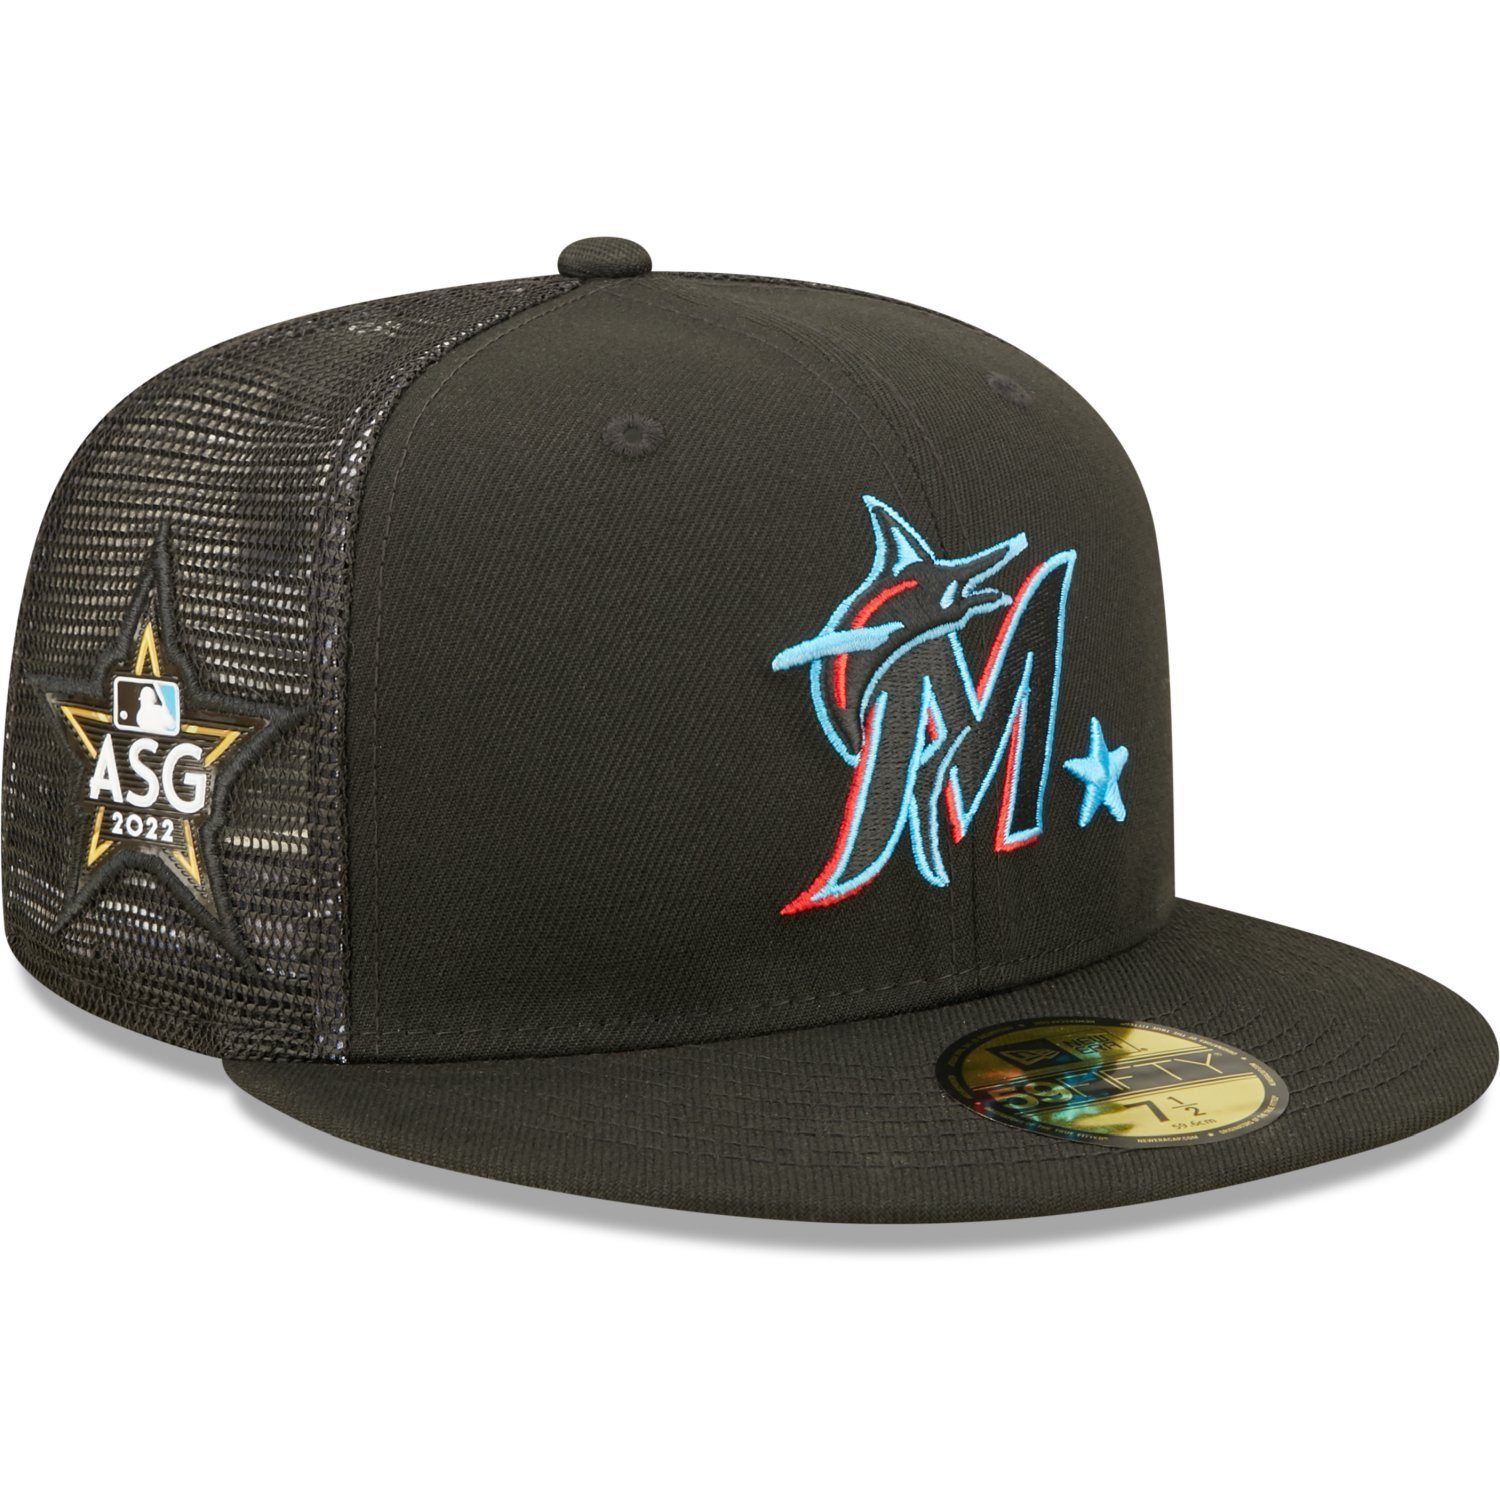 New Era Fitted Cap 59Fifty ALLSTAR GAME Miami Marlins